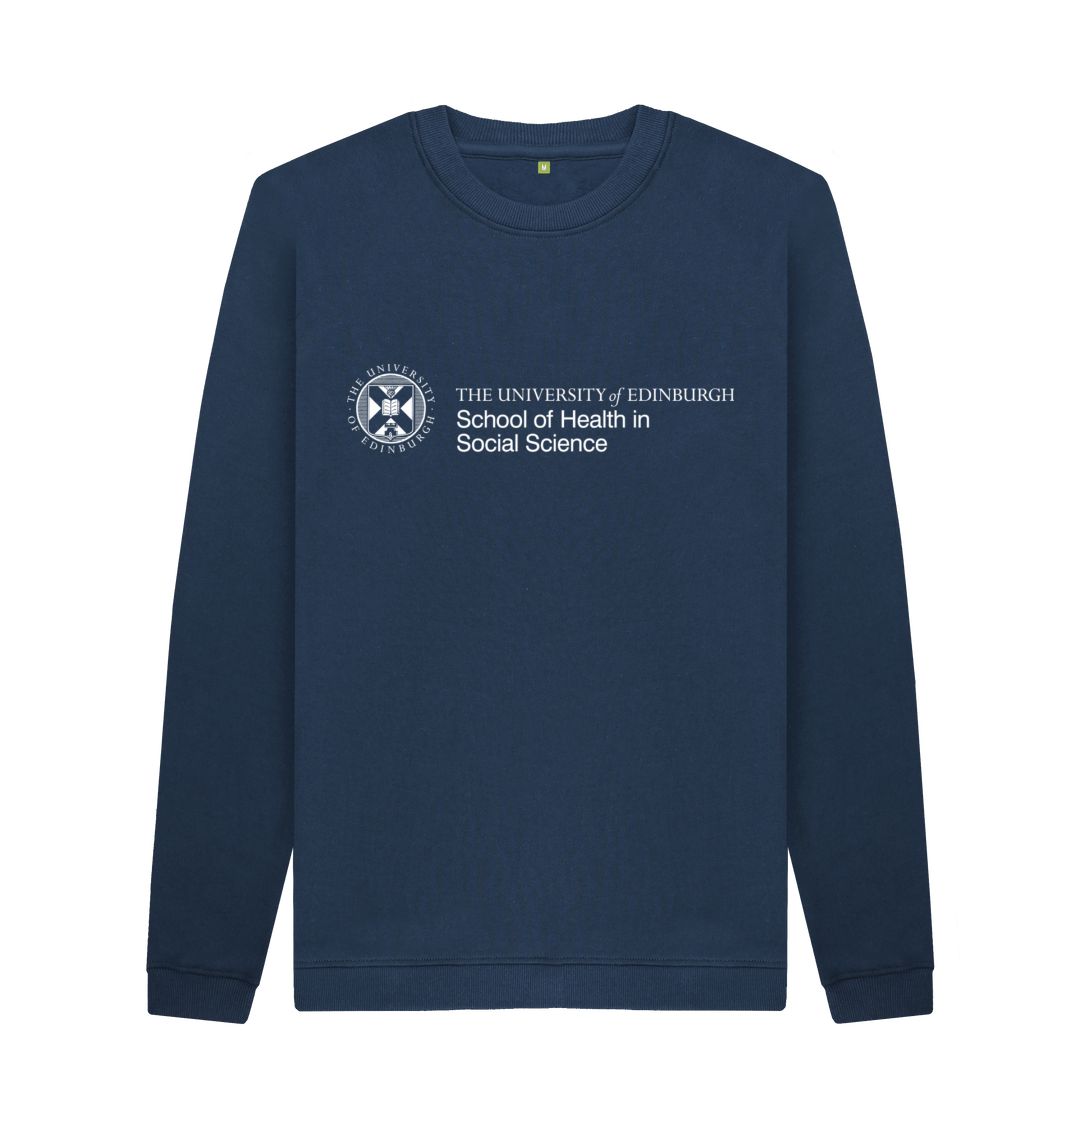 Navy Sweatshirt with white University crest and text that reads ' University of Edinburgh School of Health in Social Science